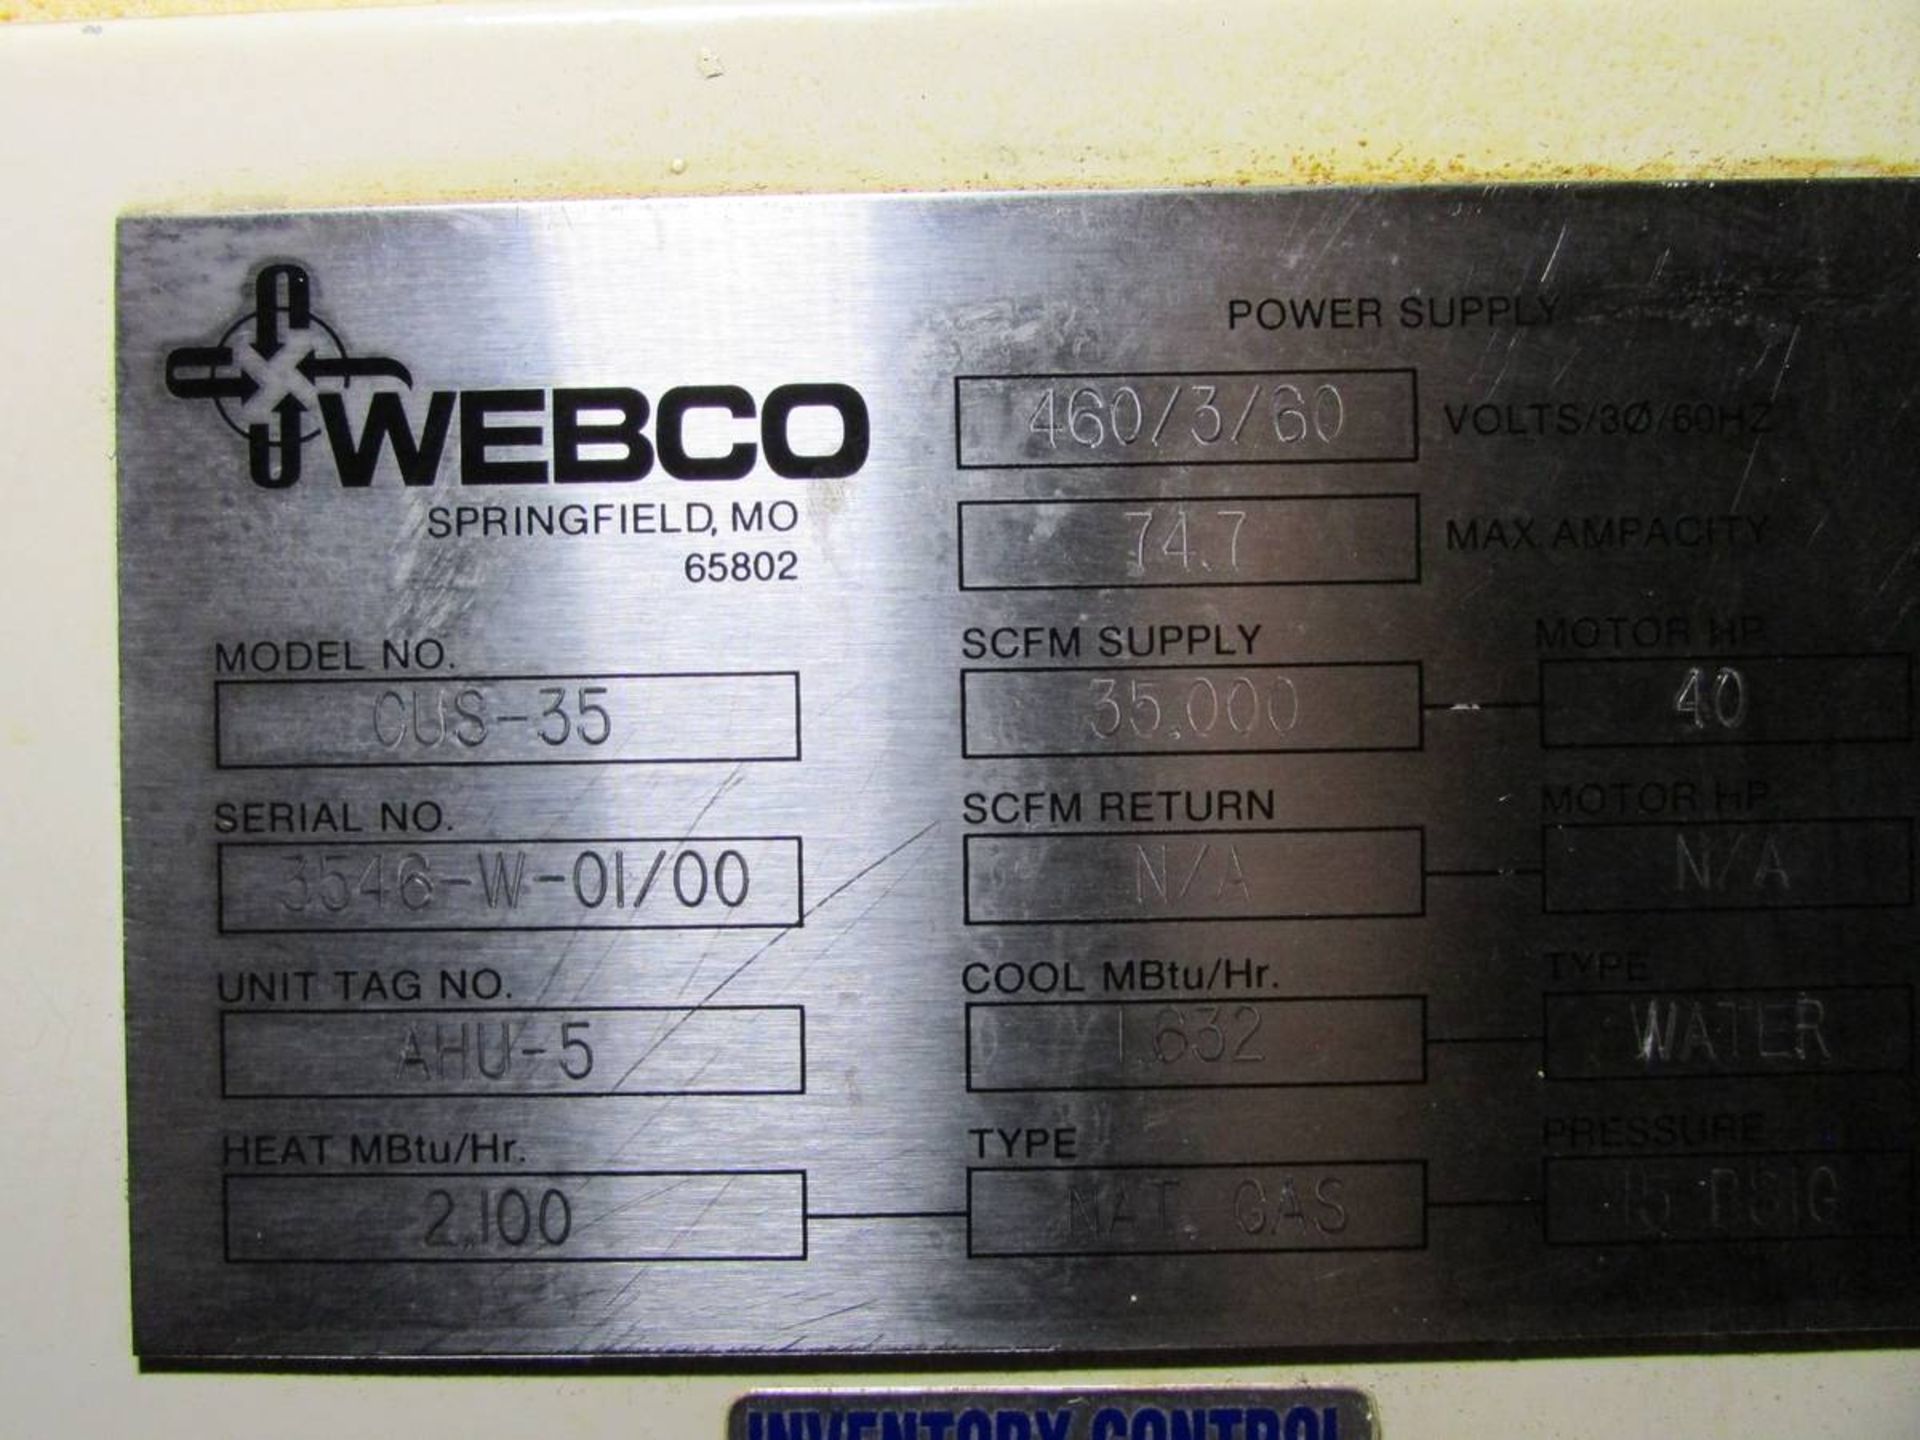 2000 Webco CUS-35 Overhead Air Handling Unit - Image 17 of 17